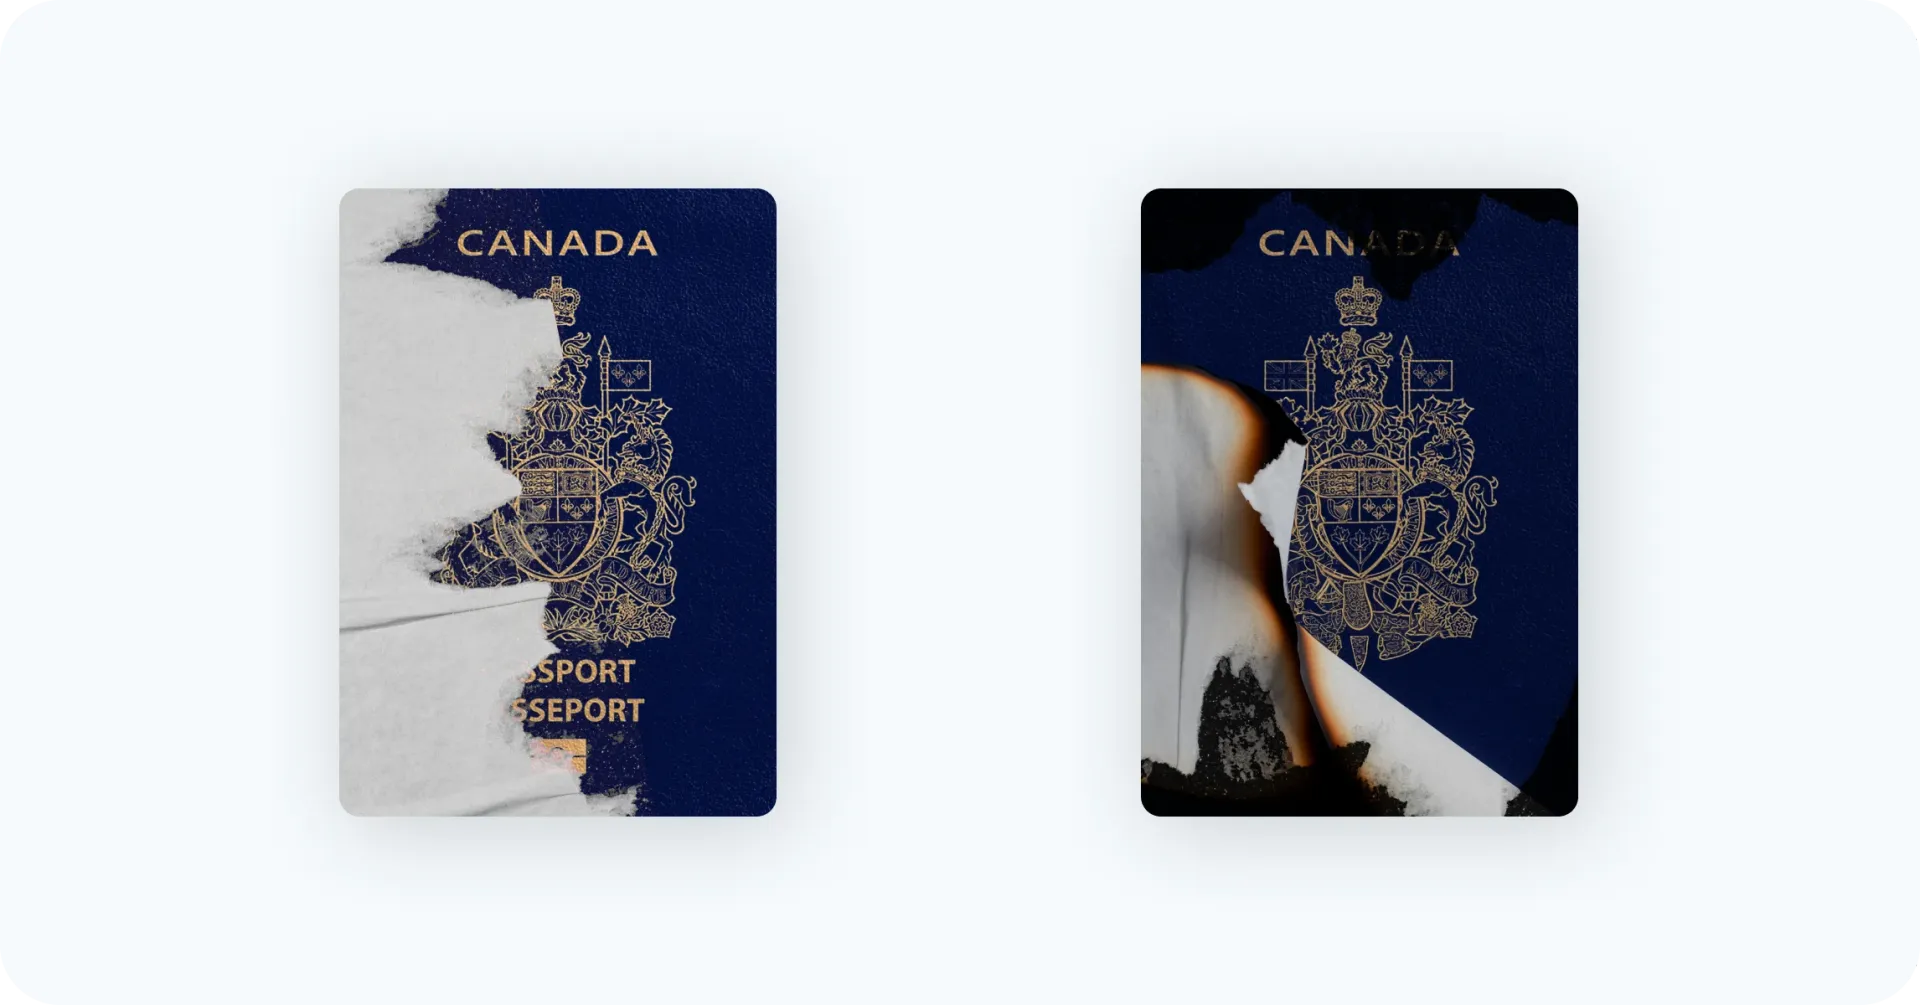 Examples of damaged Canadian passport.